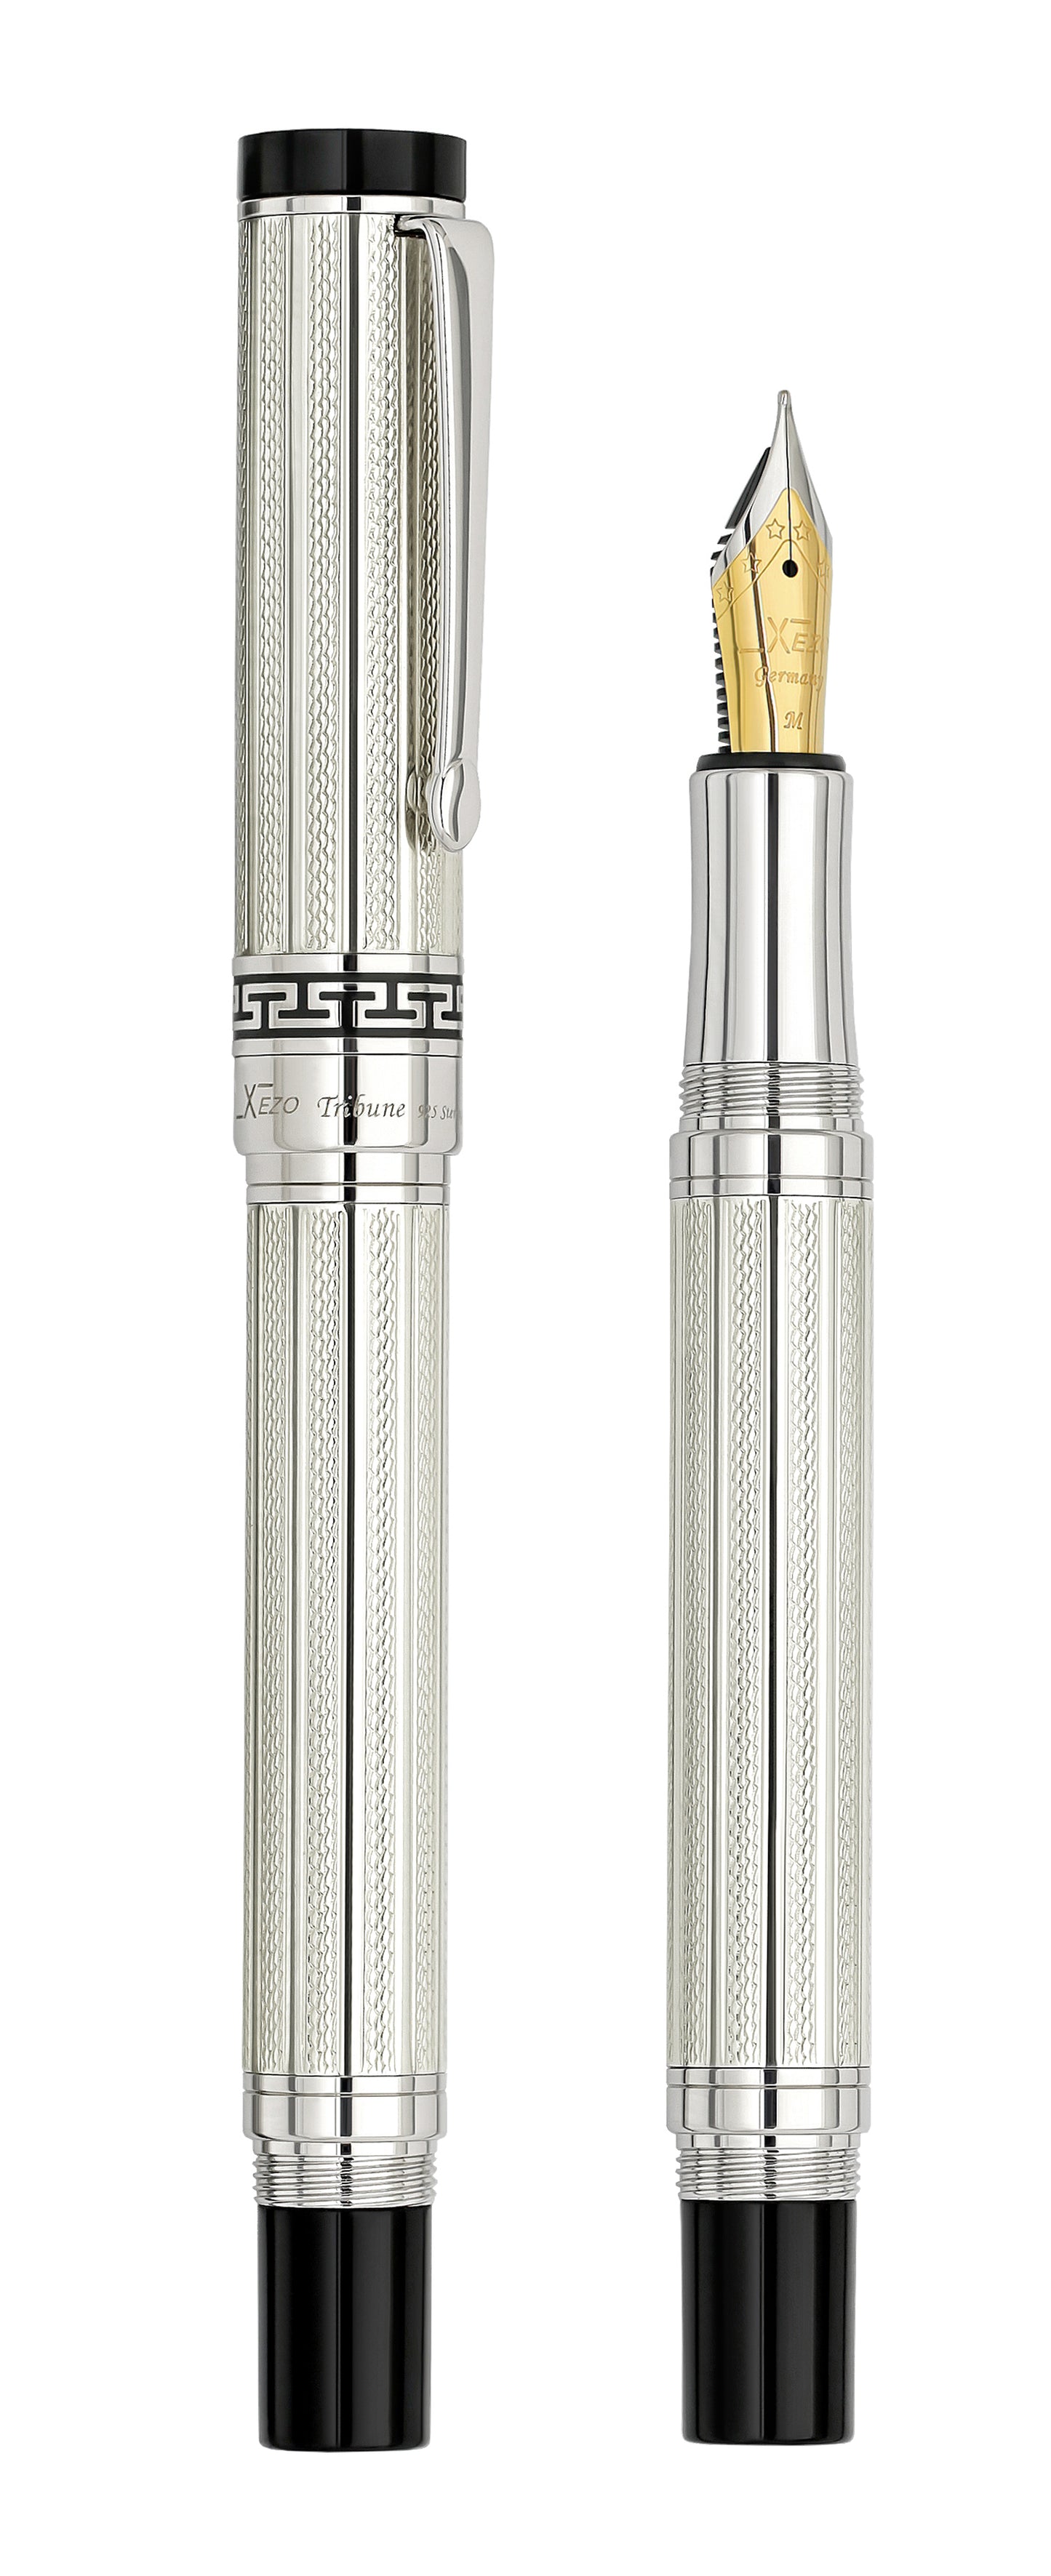 Xezo – Comparison between 3/4 view of the capped and uncapped Tribune 925 Sterling Silver FM fountain pens